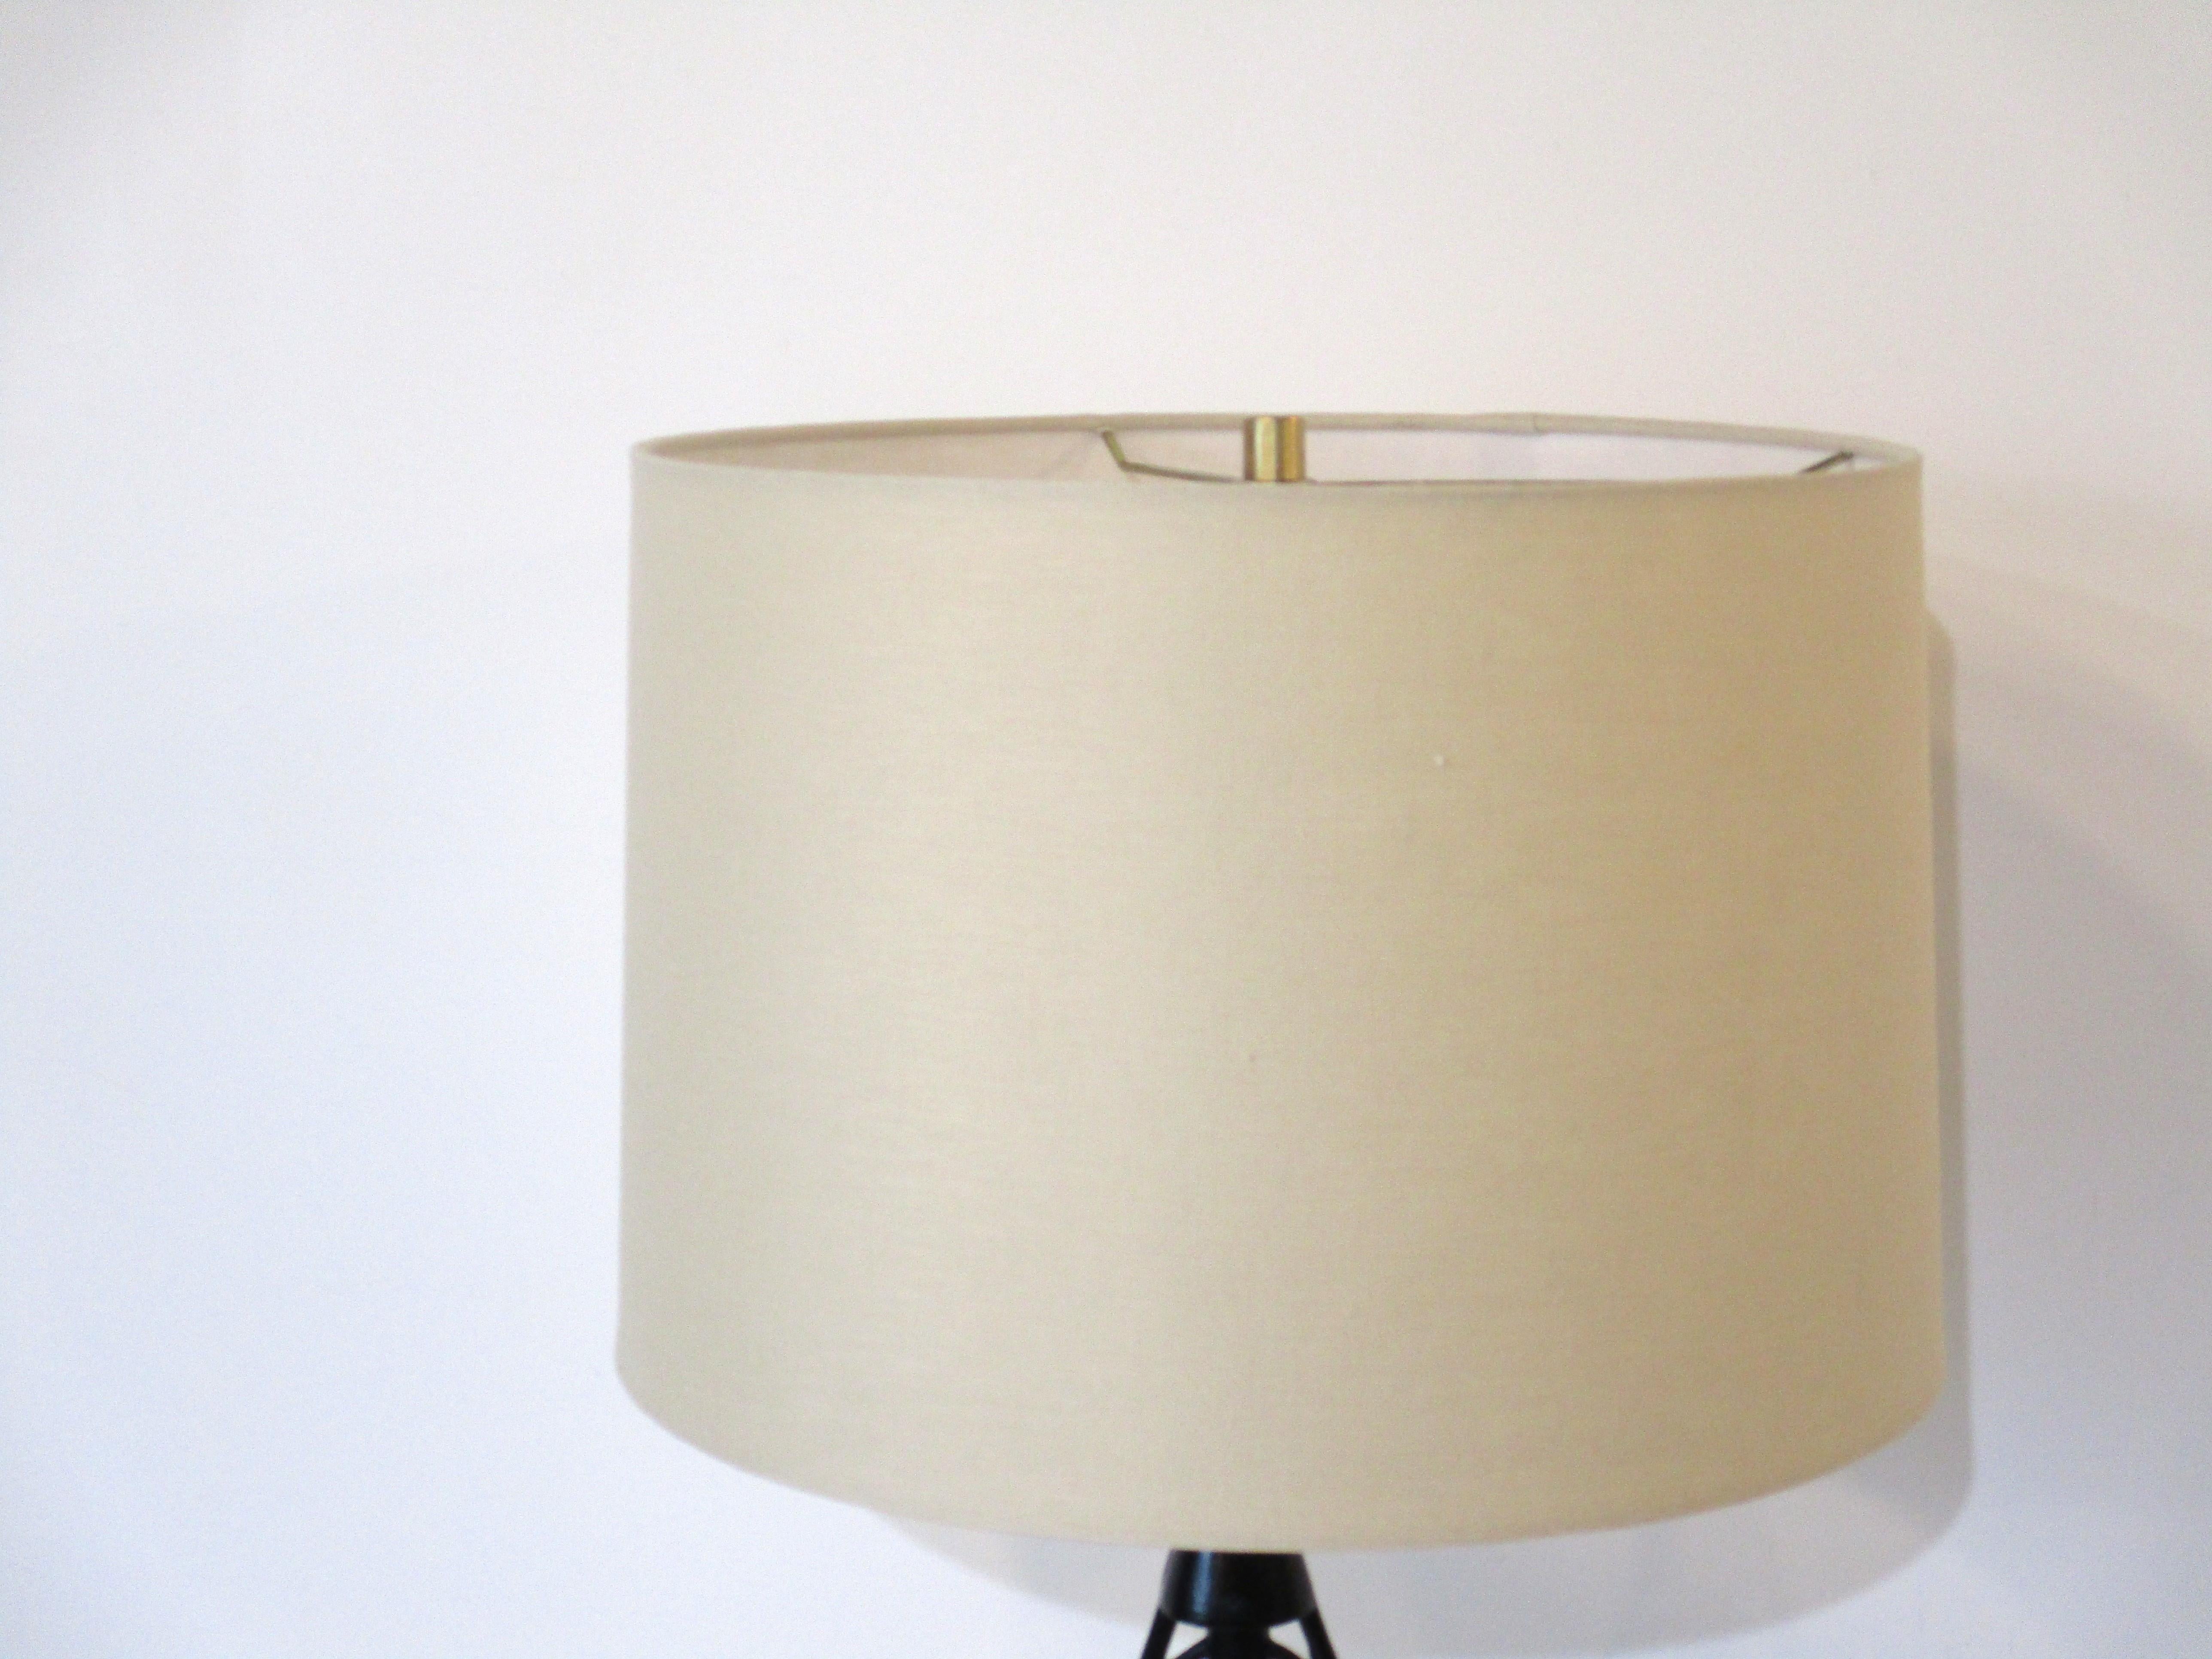 A welded black iron sculptural body table lamp having a fish bone motif sitting on a wood base with brass detail. Topped with a light beige linen drum shade and brushed brass final, designed in the manner of Frederick Weinberg and Heifetz.